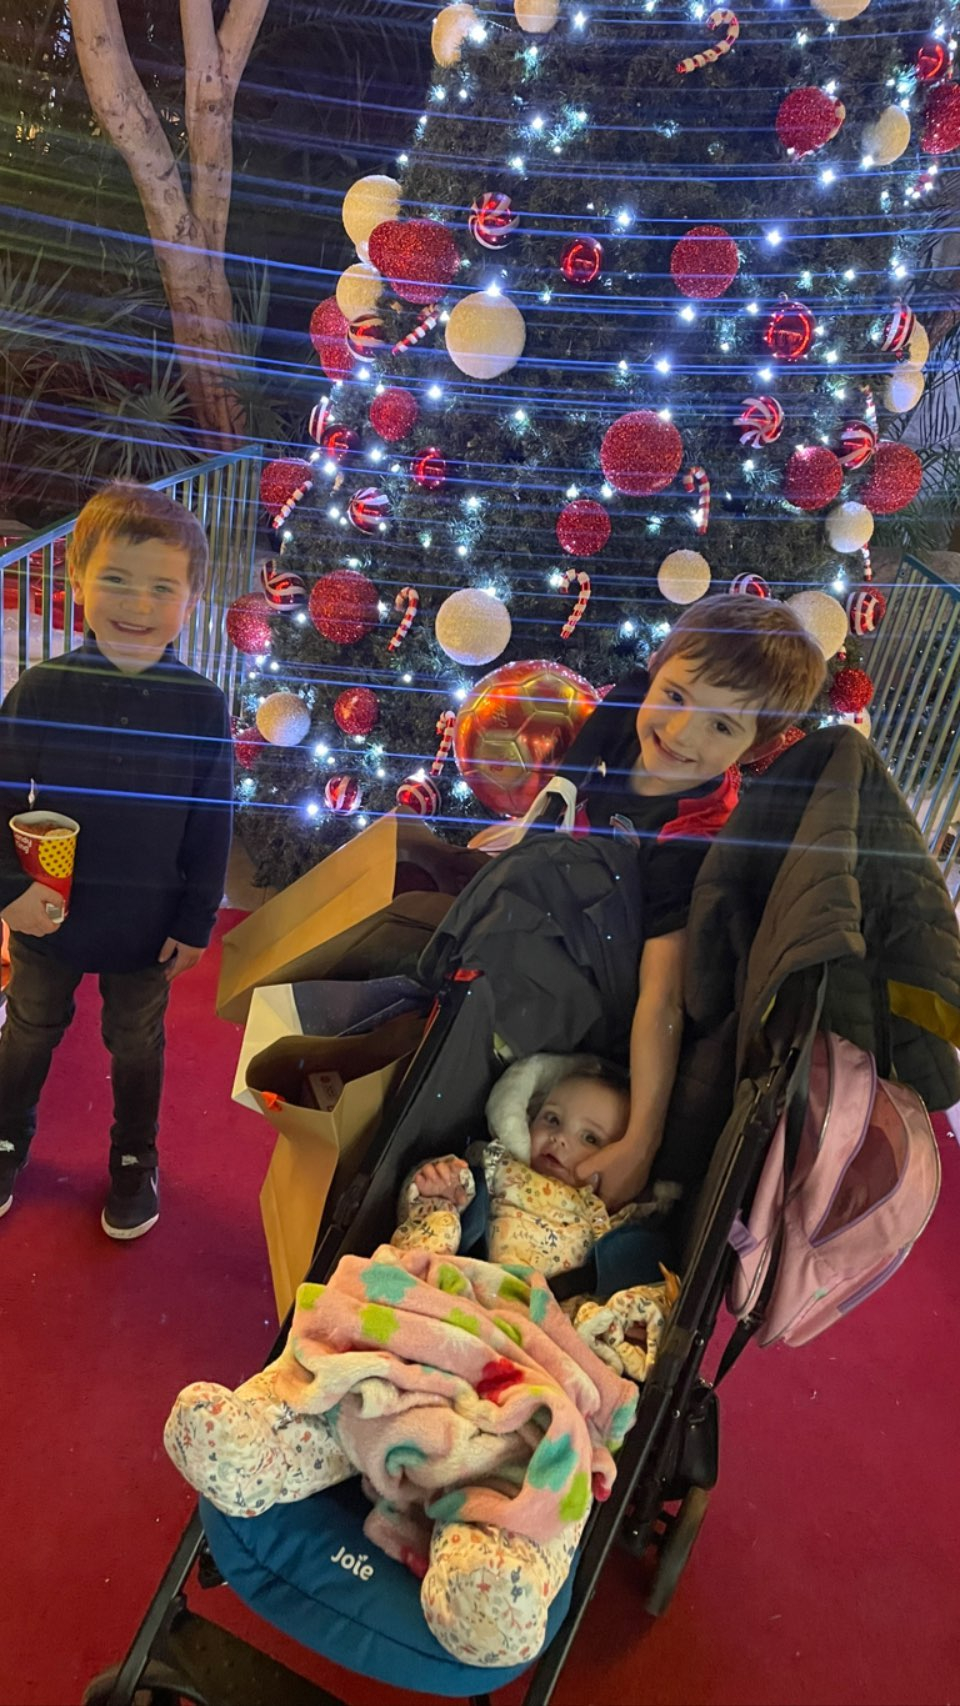 Helen Skelton shares adorable festive snap of rarely-seen children ahead of first Christmas since marriage split